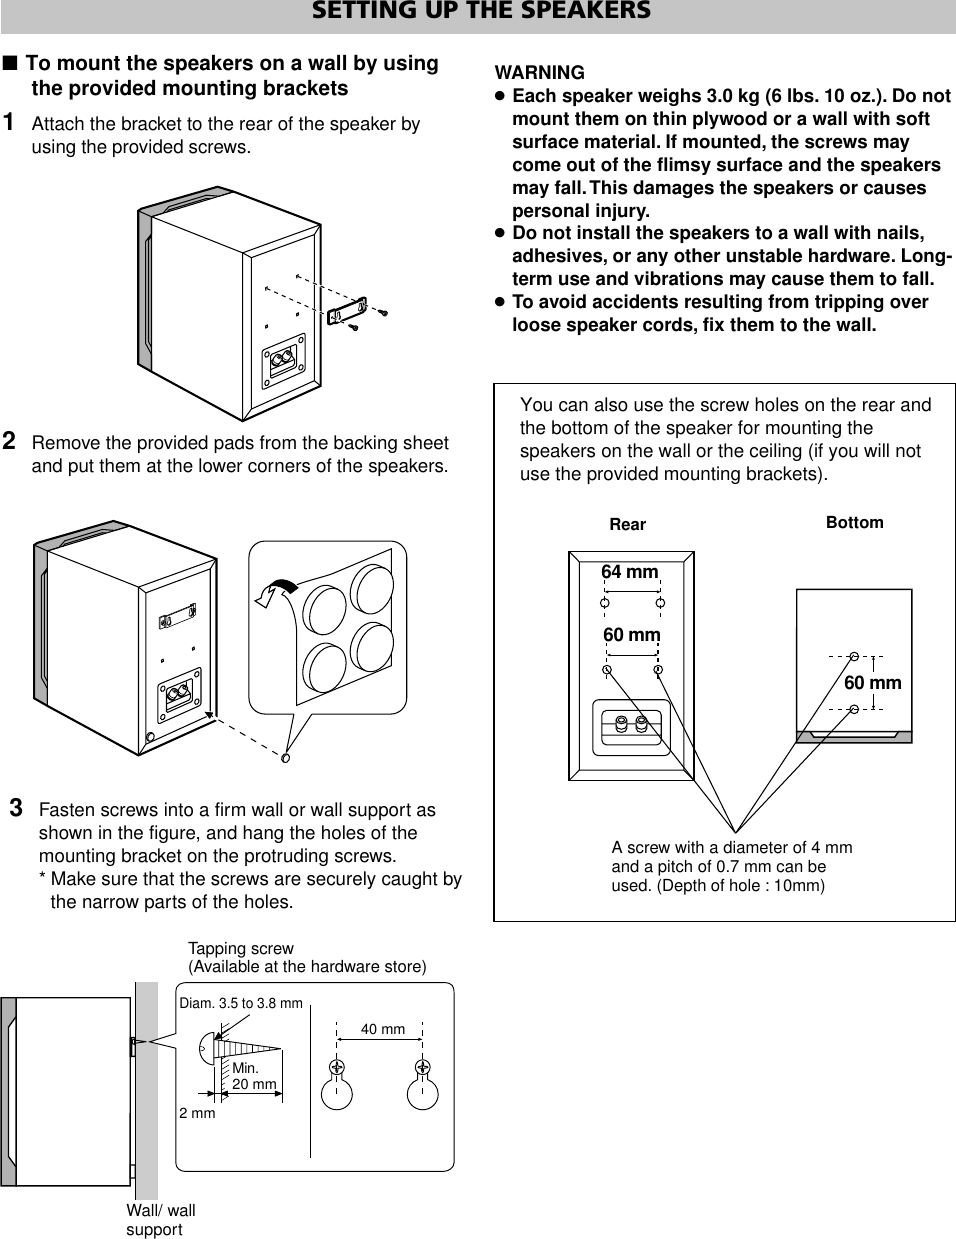 Page 2 of 4 - Yamaha NS-1000MM(Eng) NS-1000MM OWNER'S MANUAL